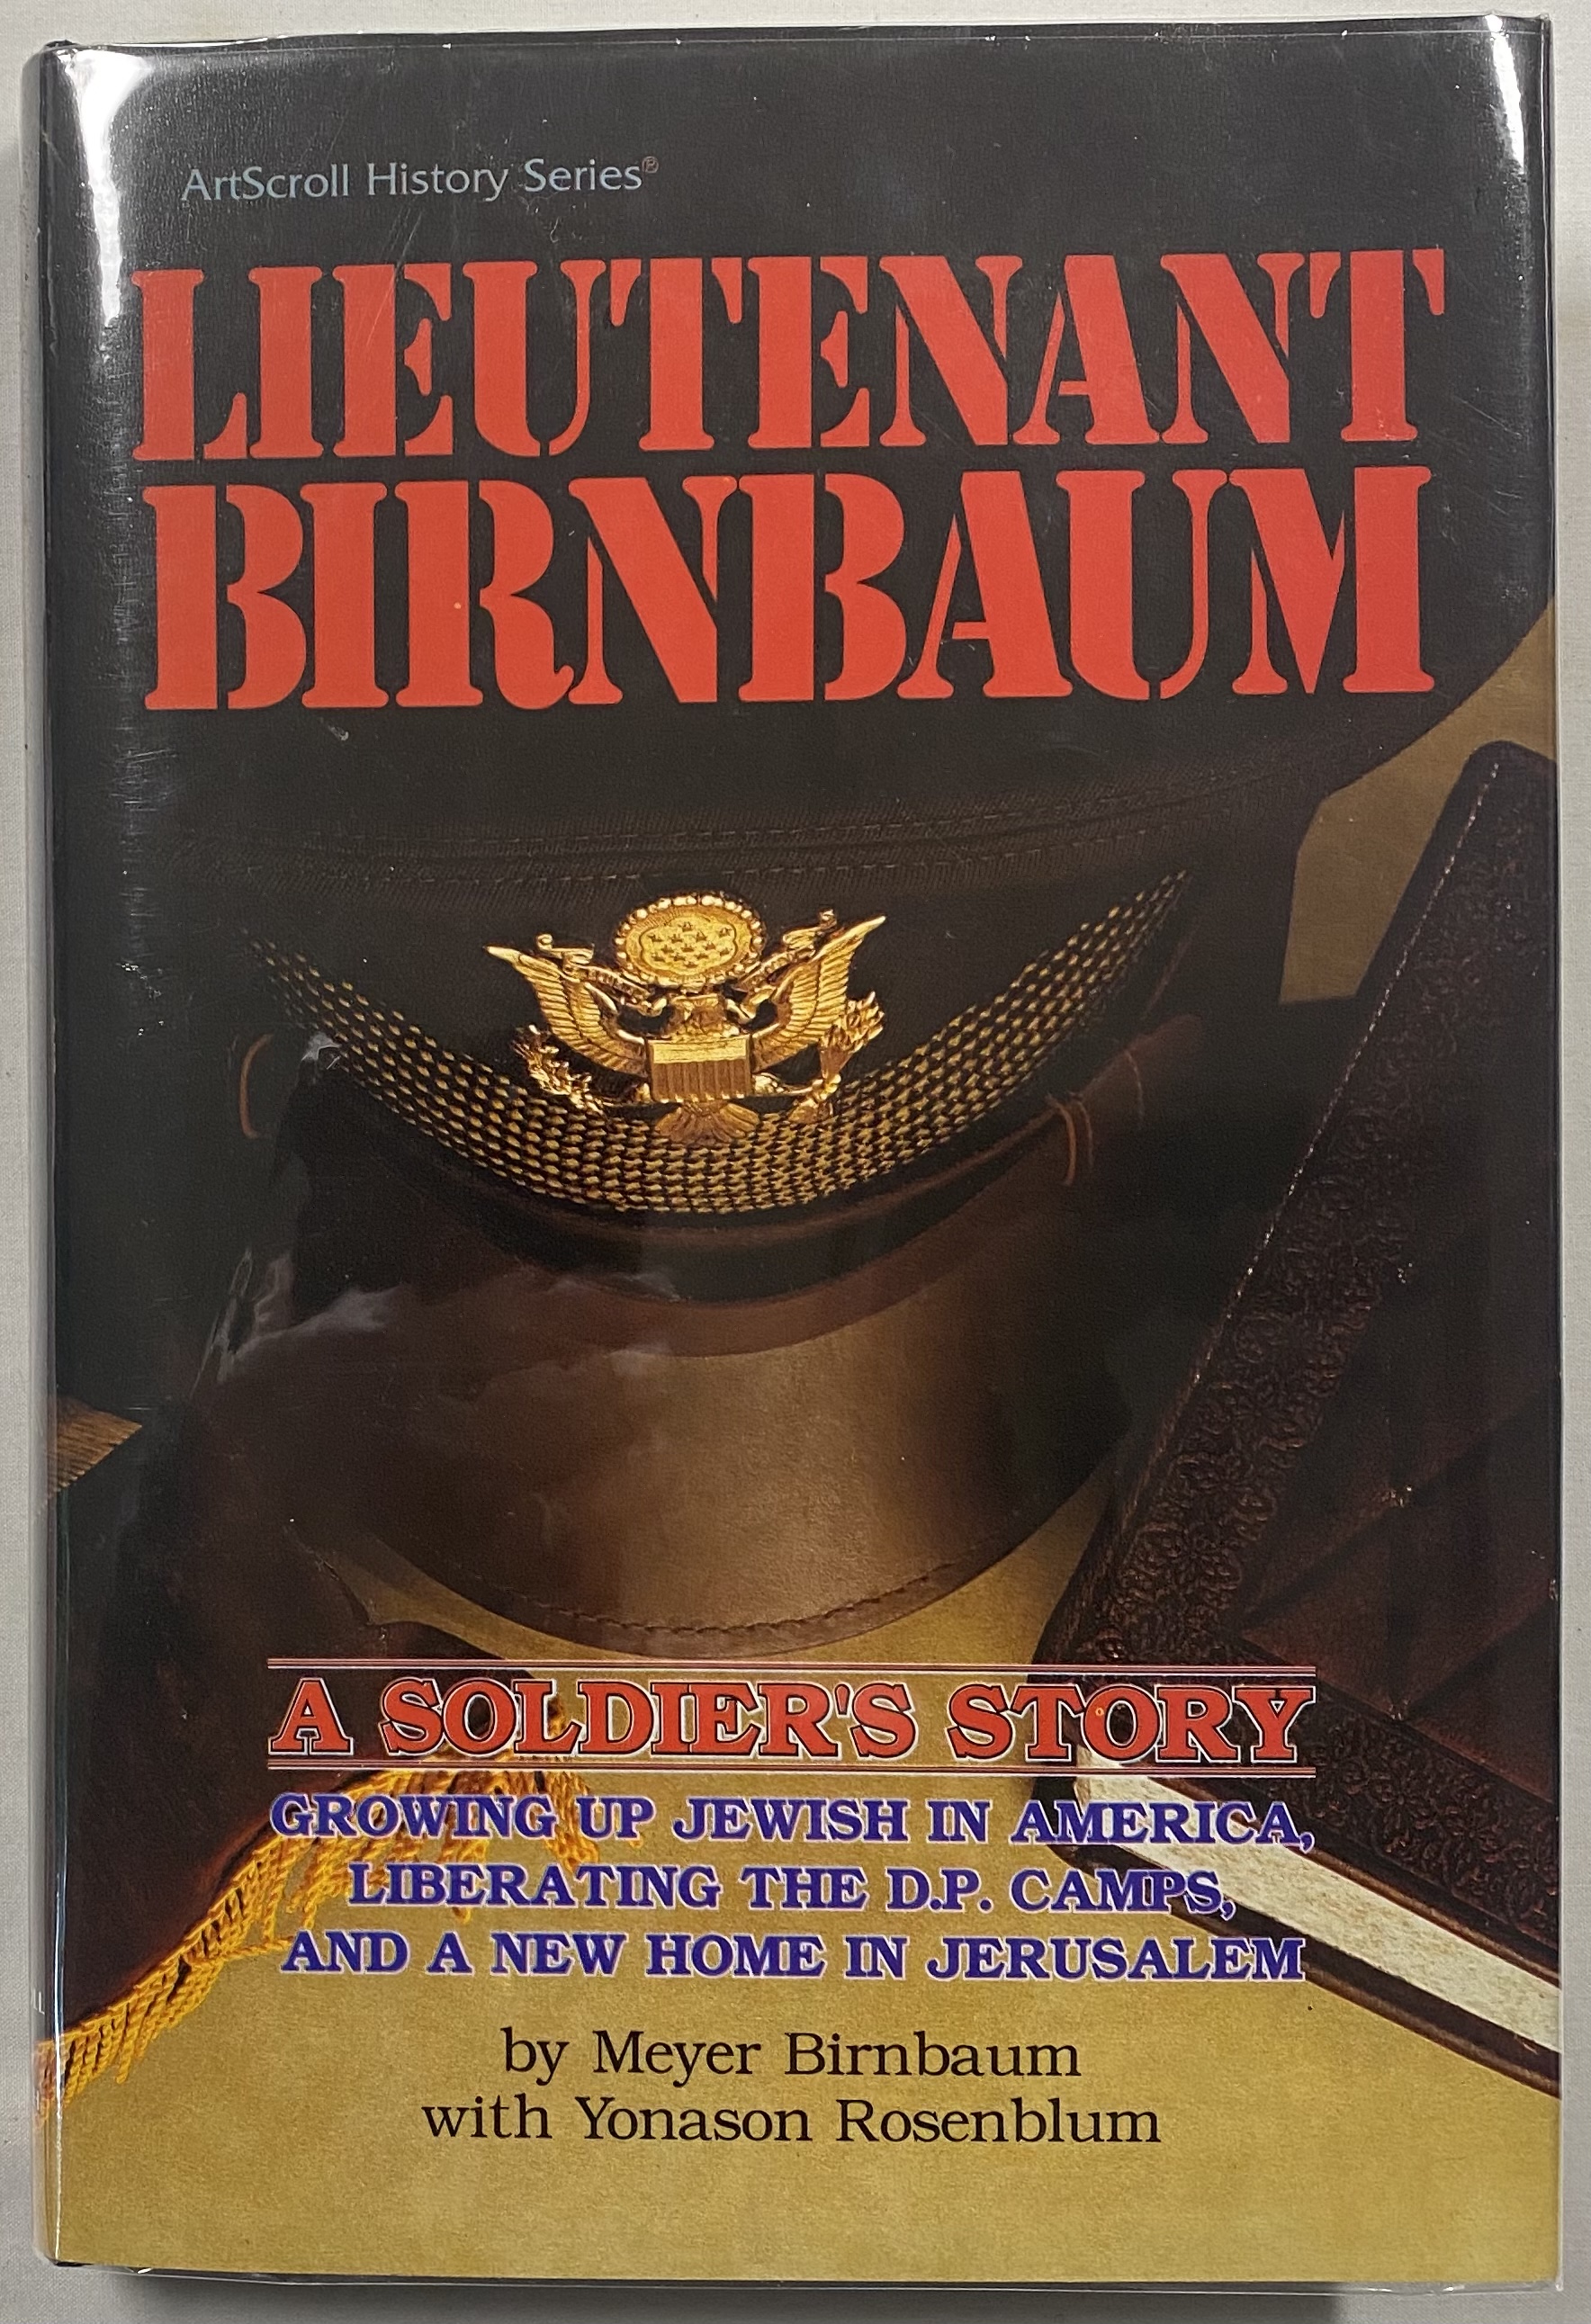 Lieutenant Birnbaum: A Soldier's Story Growing Up Jewish in America, Liberating the D. P. Camps and a New Home in Jerusalem - Meyer Birnbaum, with Yonason Rosenblum